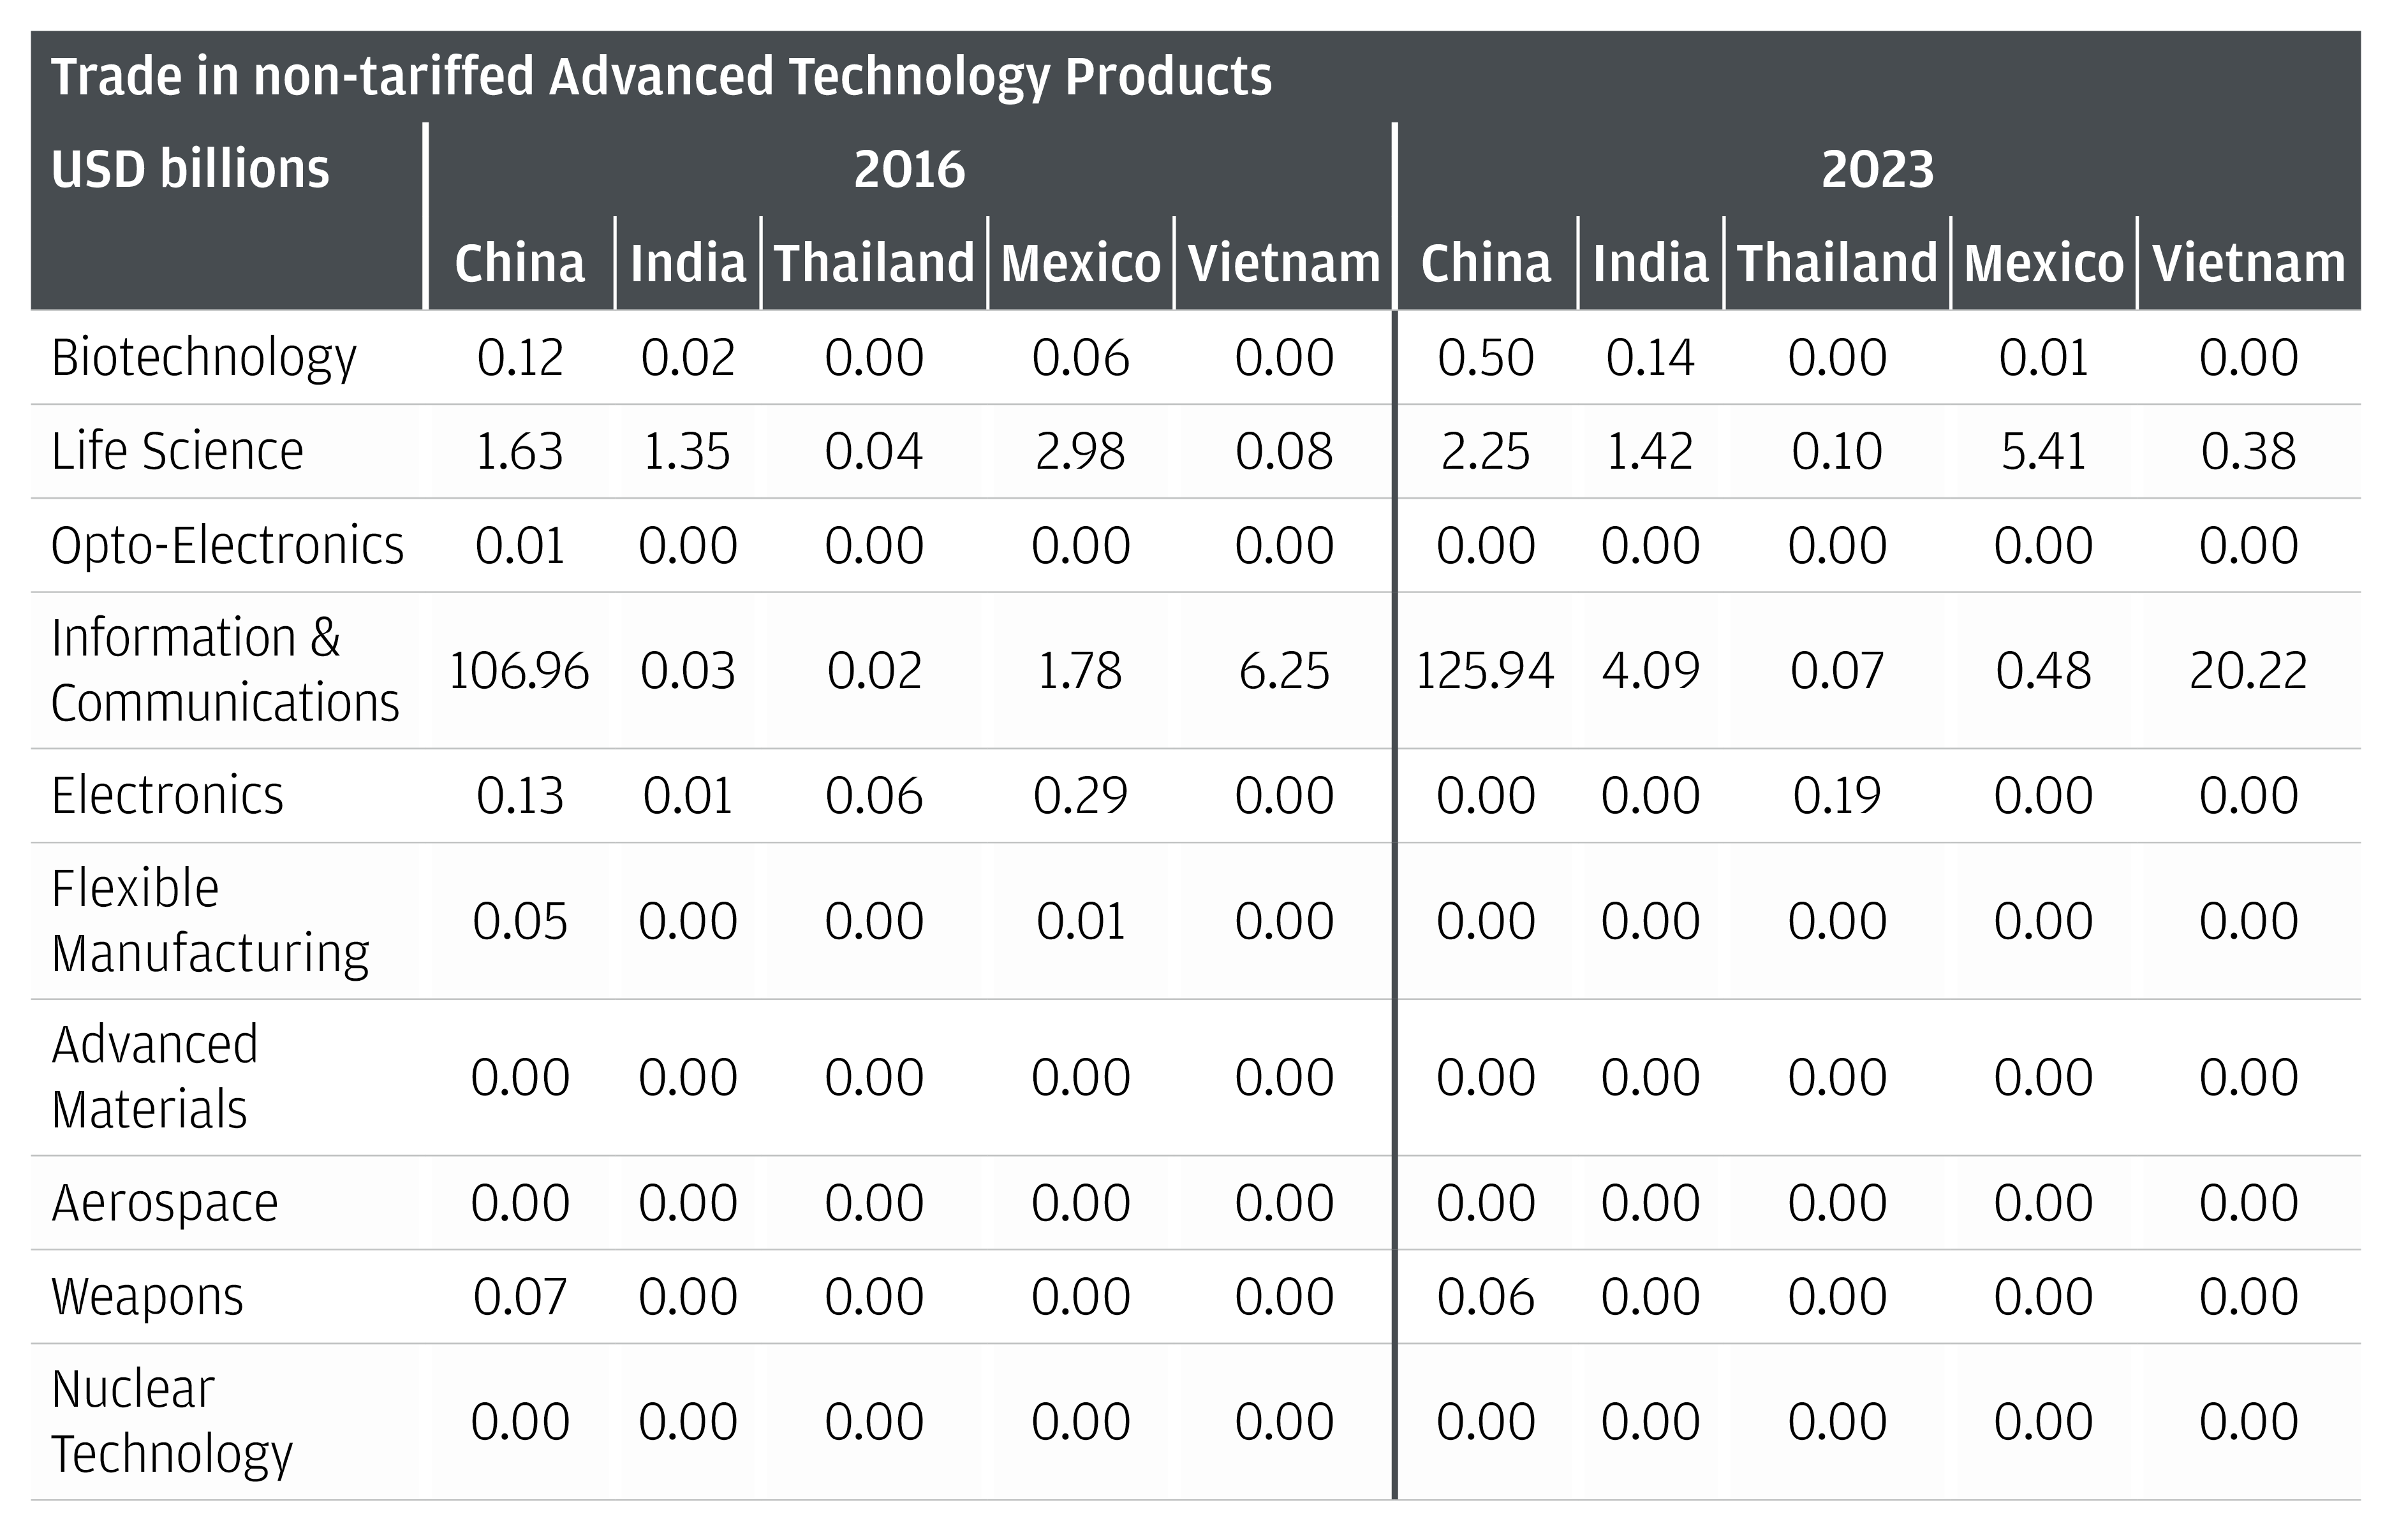 The chart describes the trade of U.S. imports of Advanced Technology Products not tariffed against China by country (China, India, Thailand, Mexico, Vietnam) in 2016 and 2023.